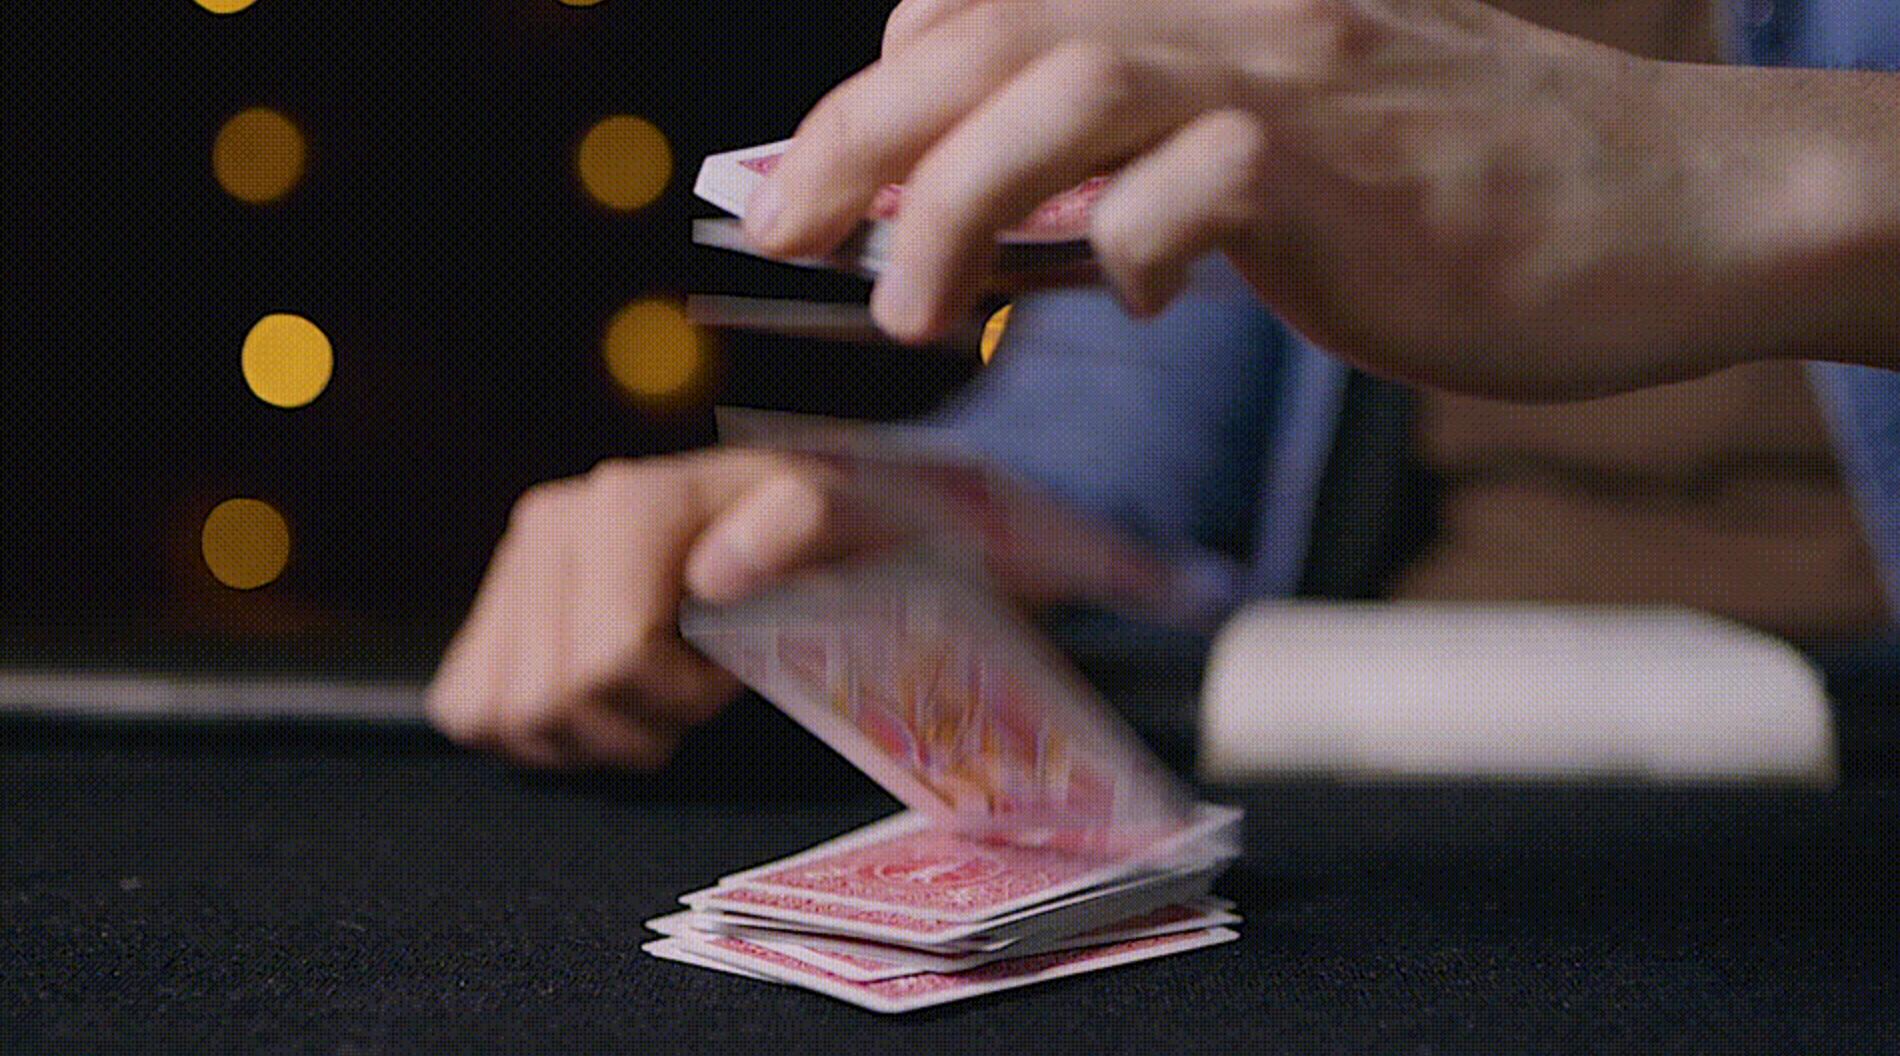 Tim Domsky - The Art of Magic：Perform Impromptu Magic Tricks with Playing Cards